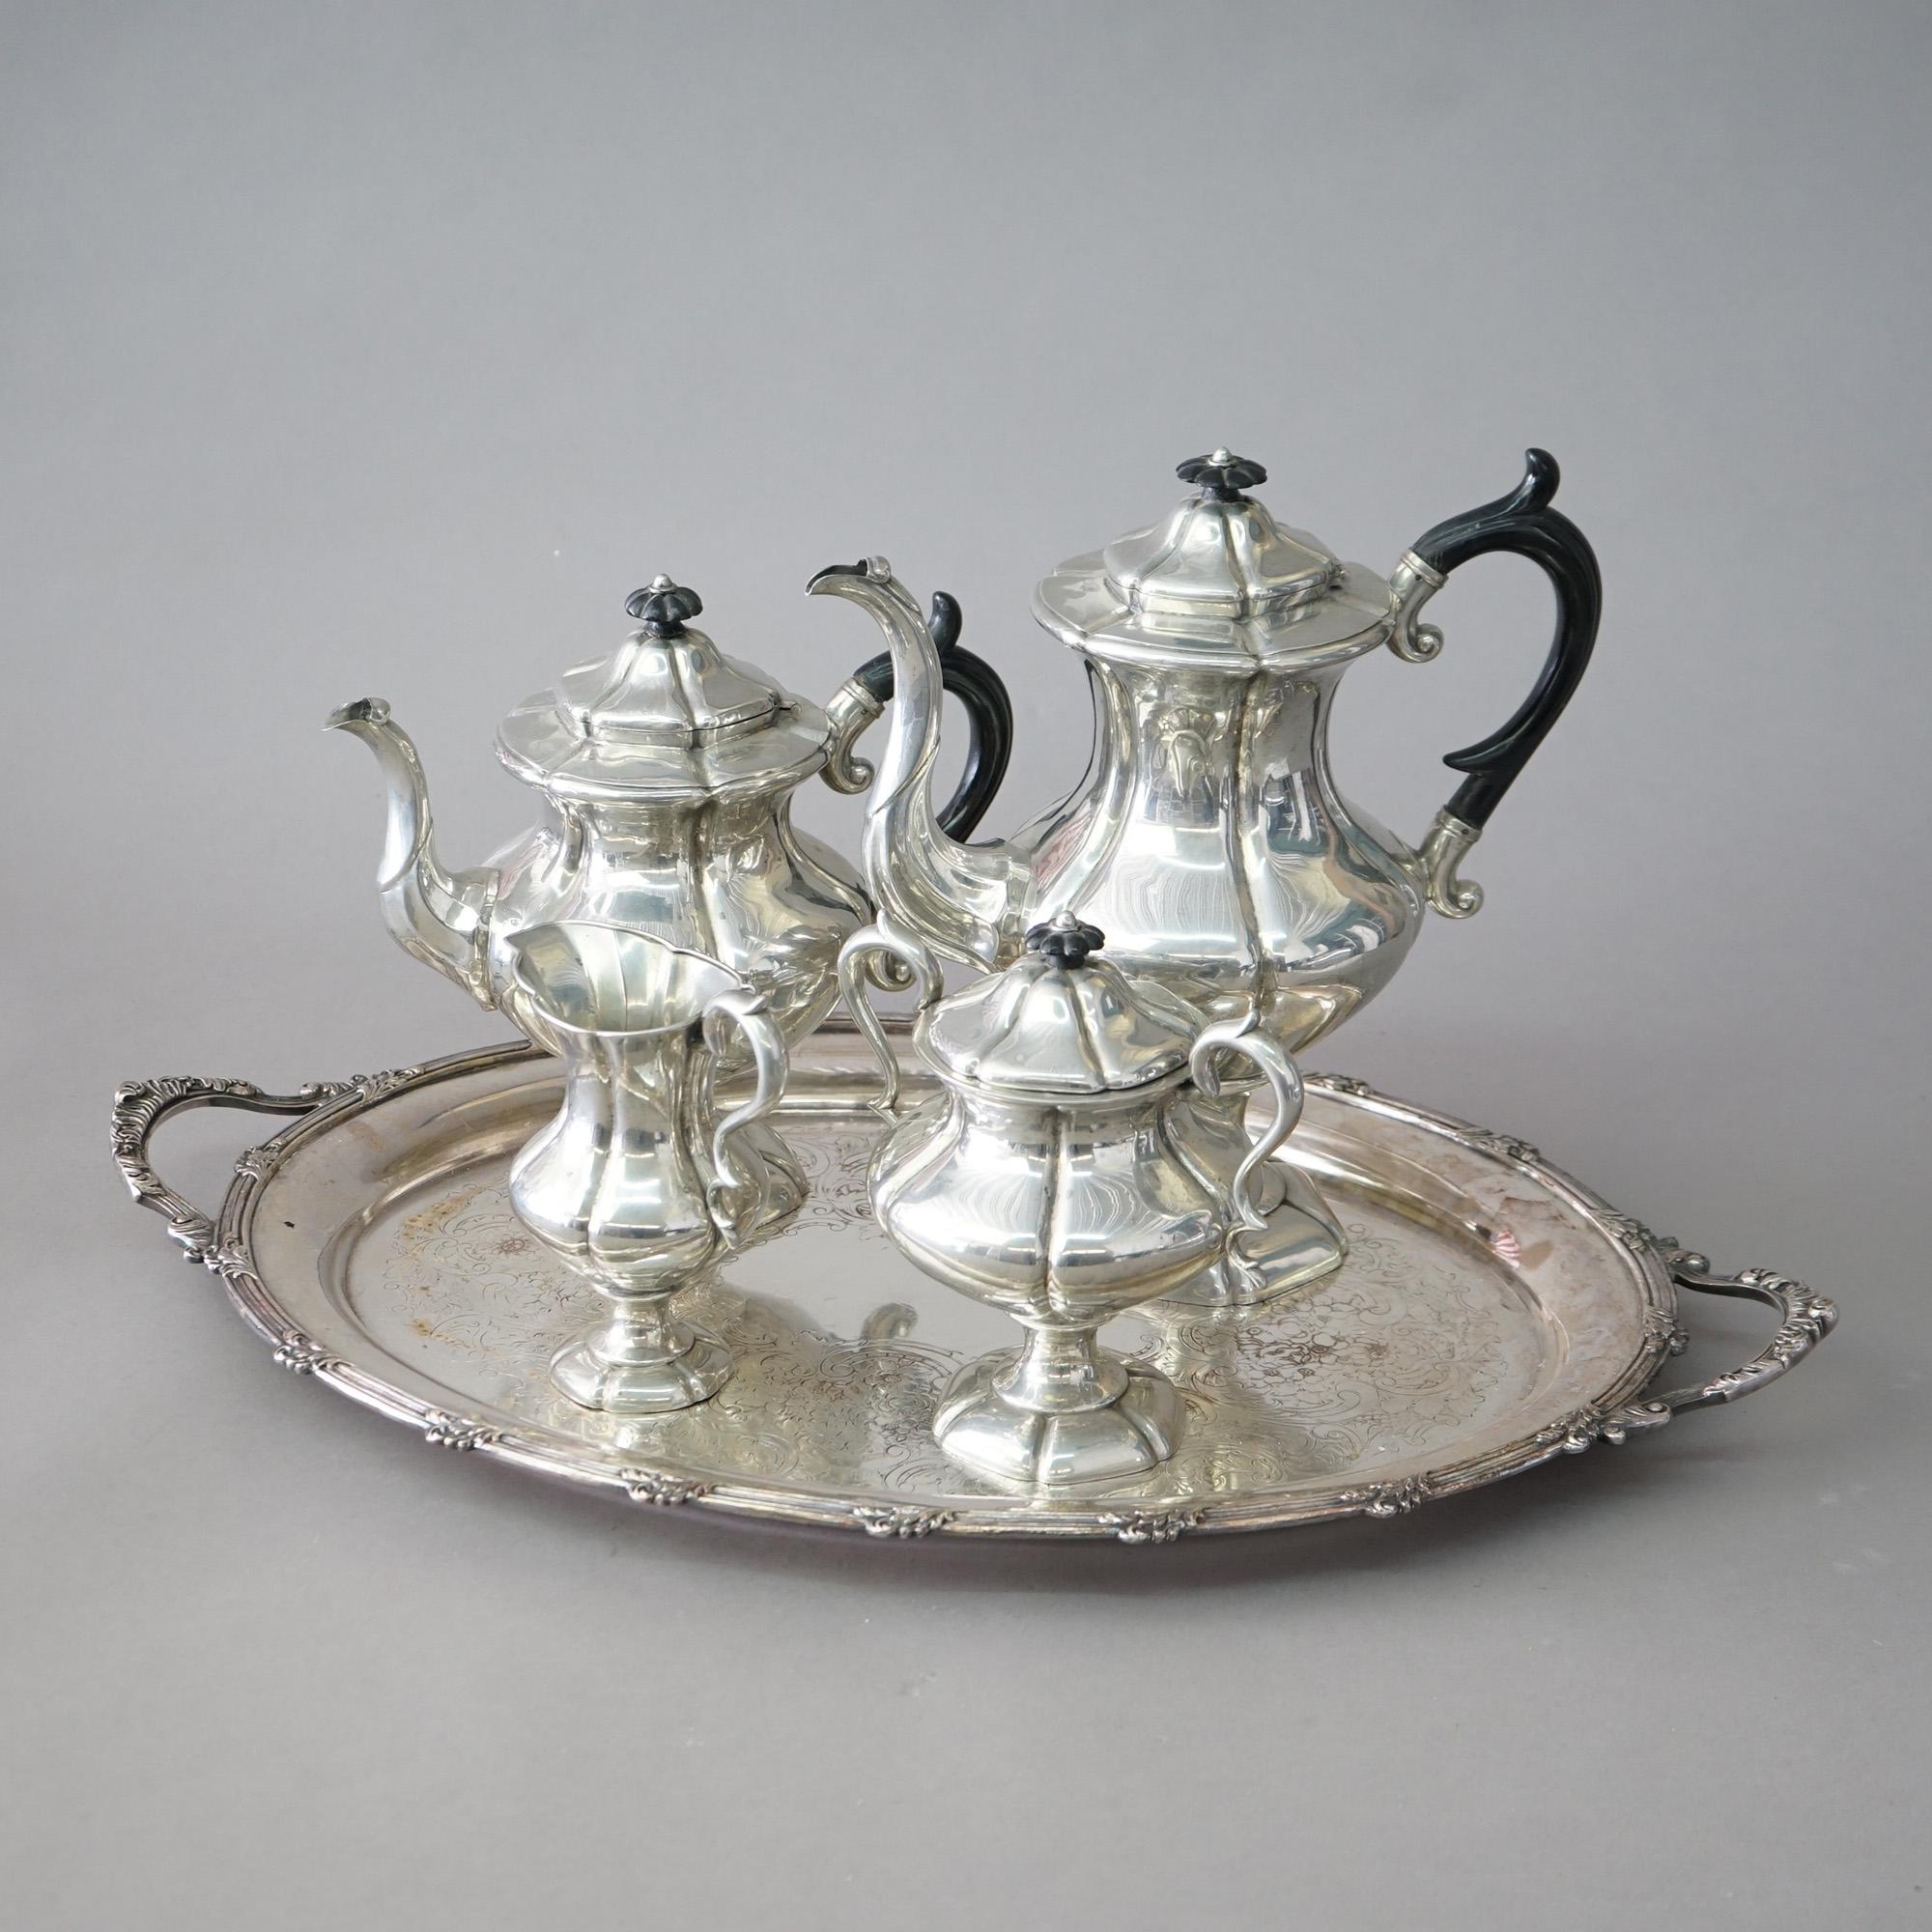 20th Century Antique Victorian Reed & Barton Silver Plate Tea & Coffee Set with Tray C1900 For Sale